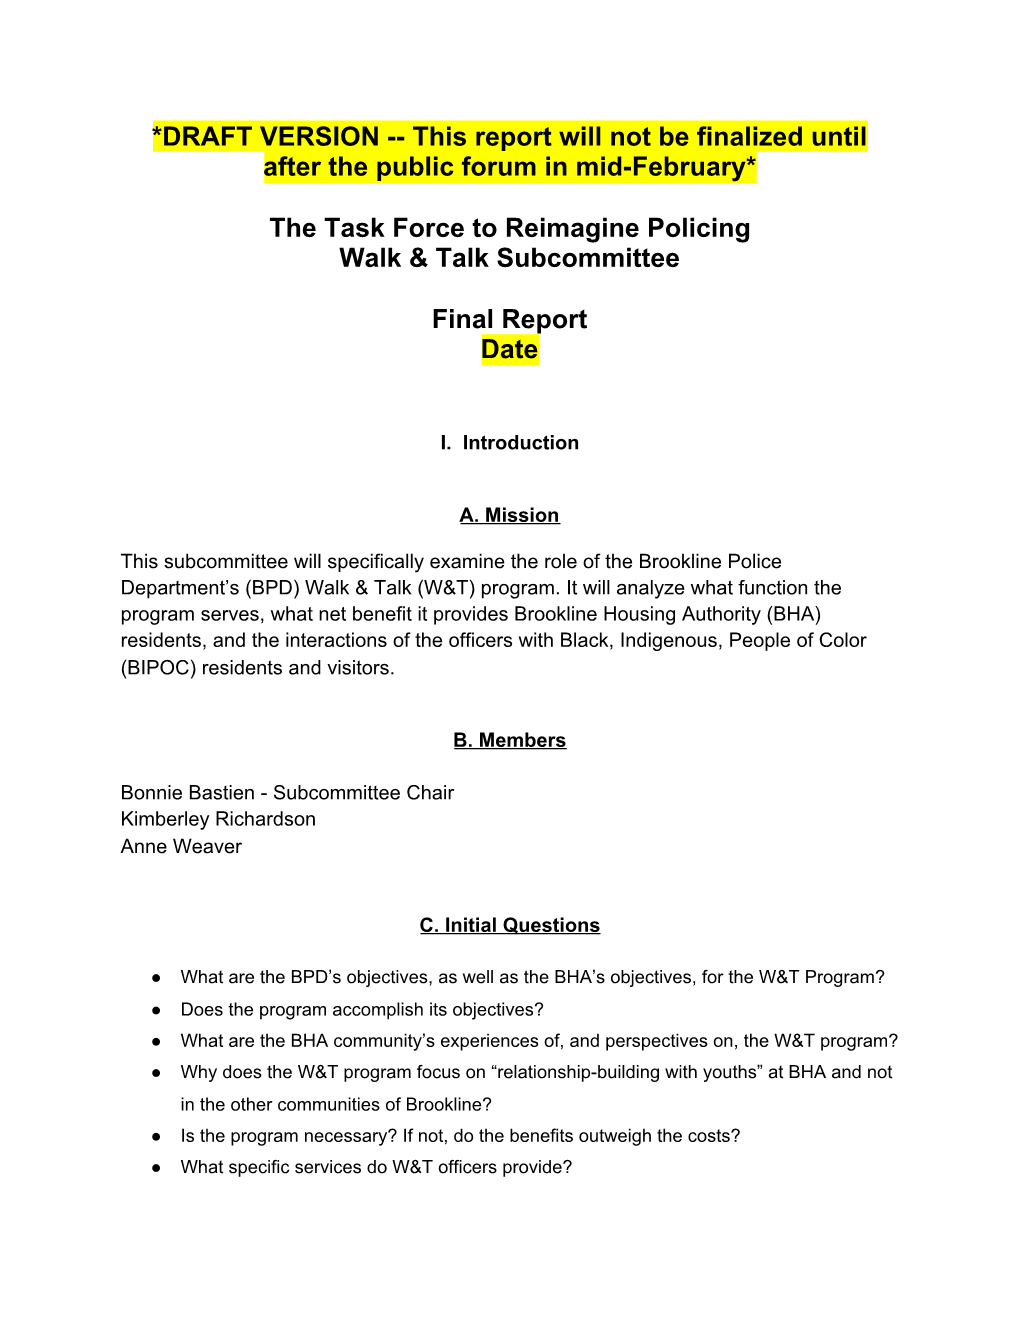 Walk and Talk Subcommittee Task Force On